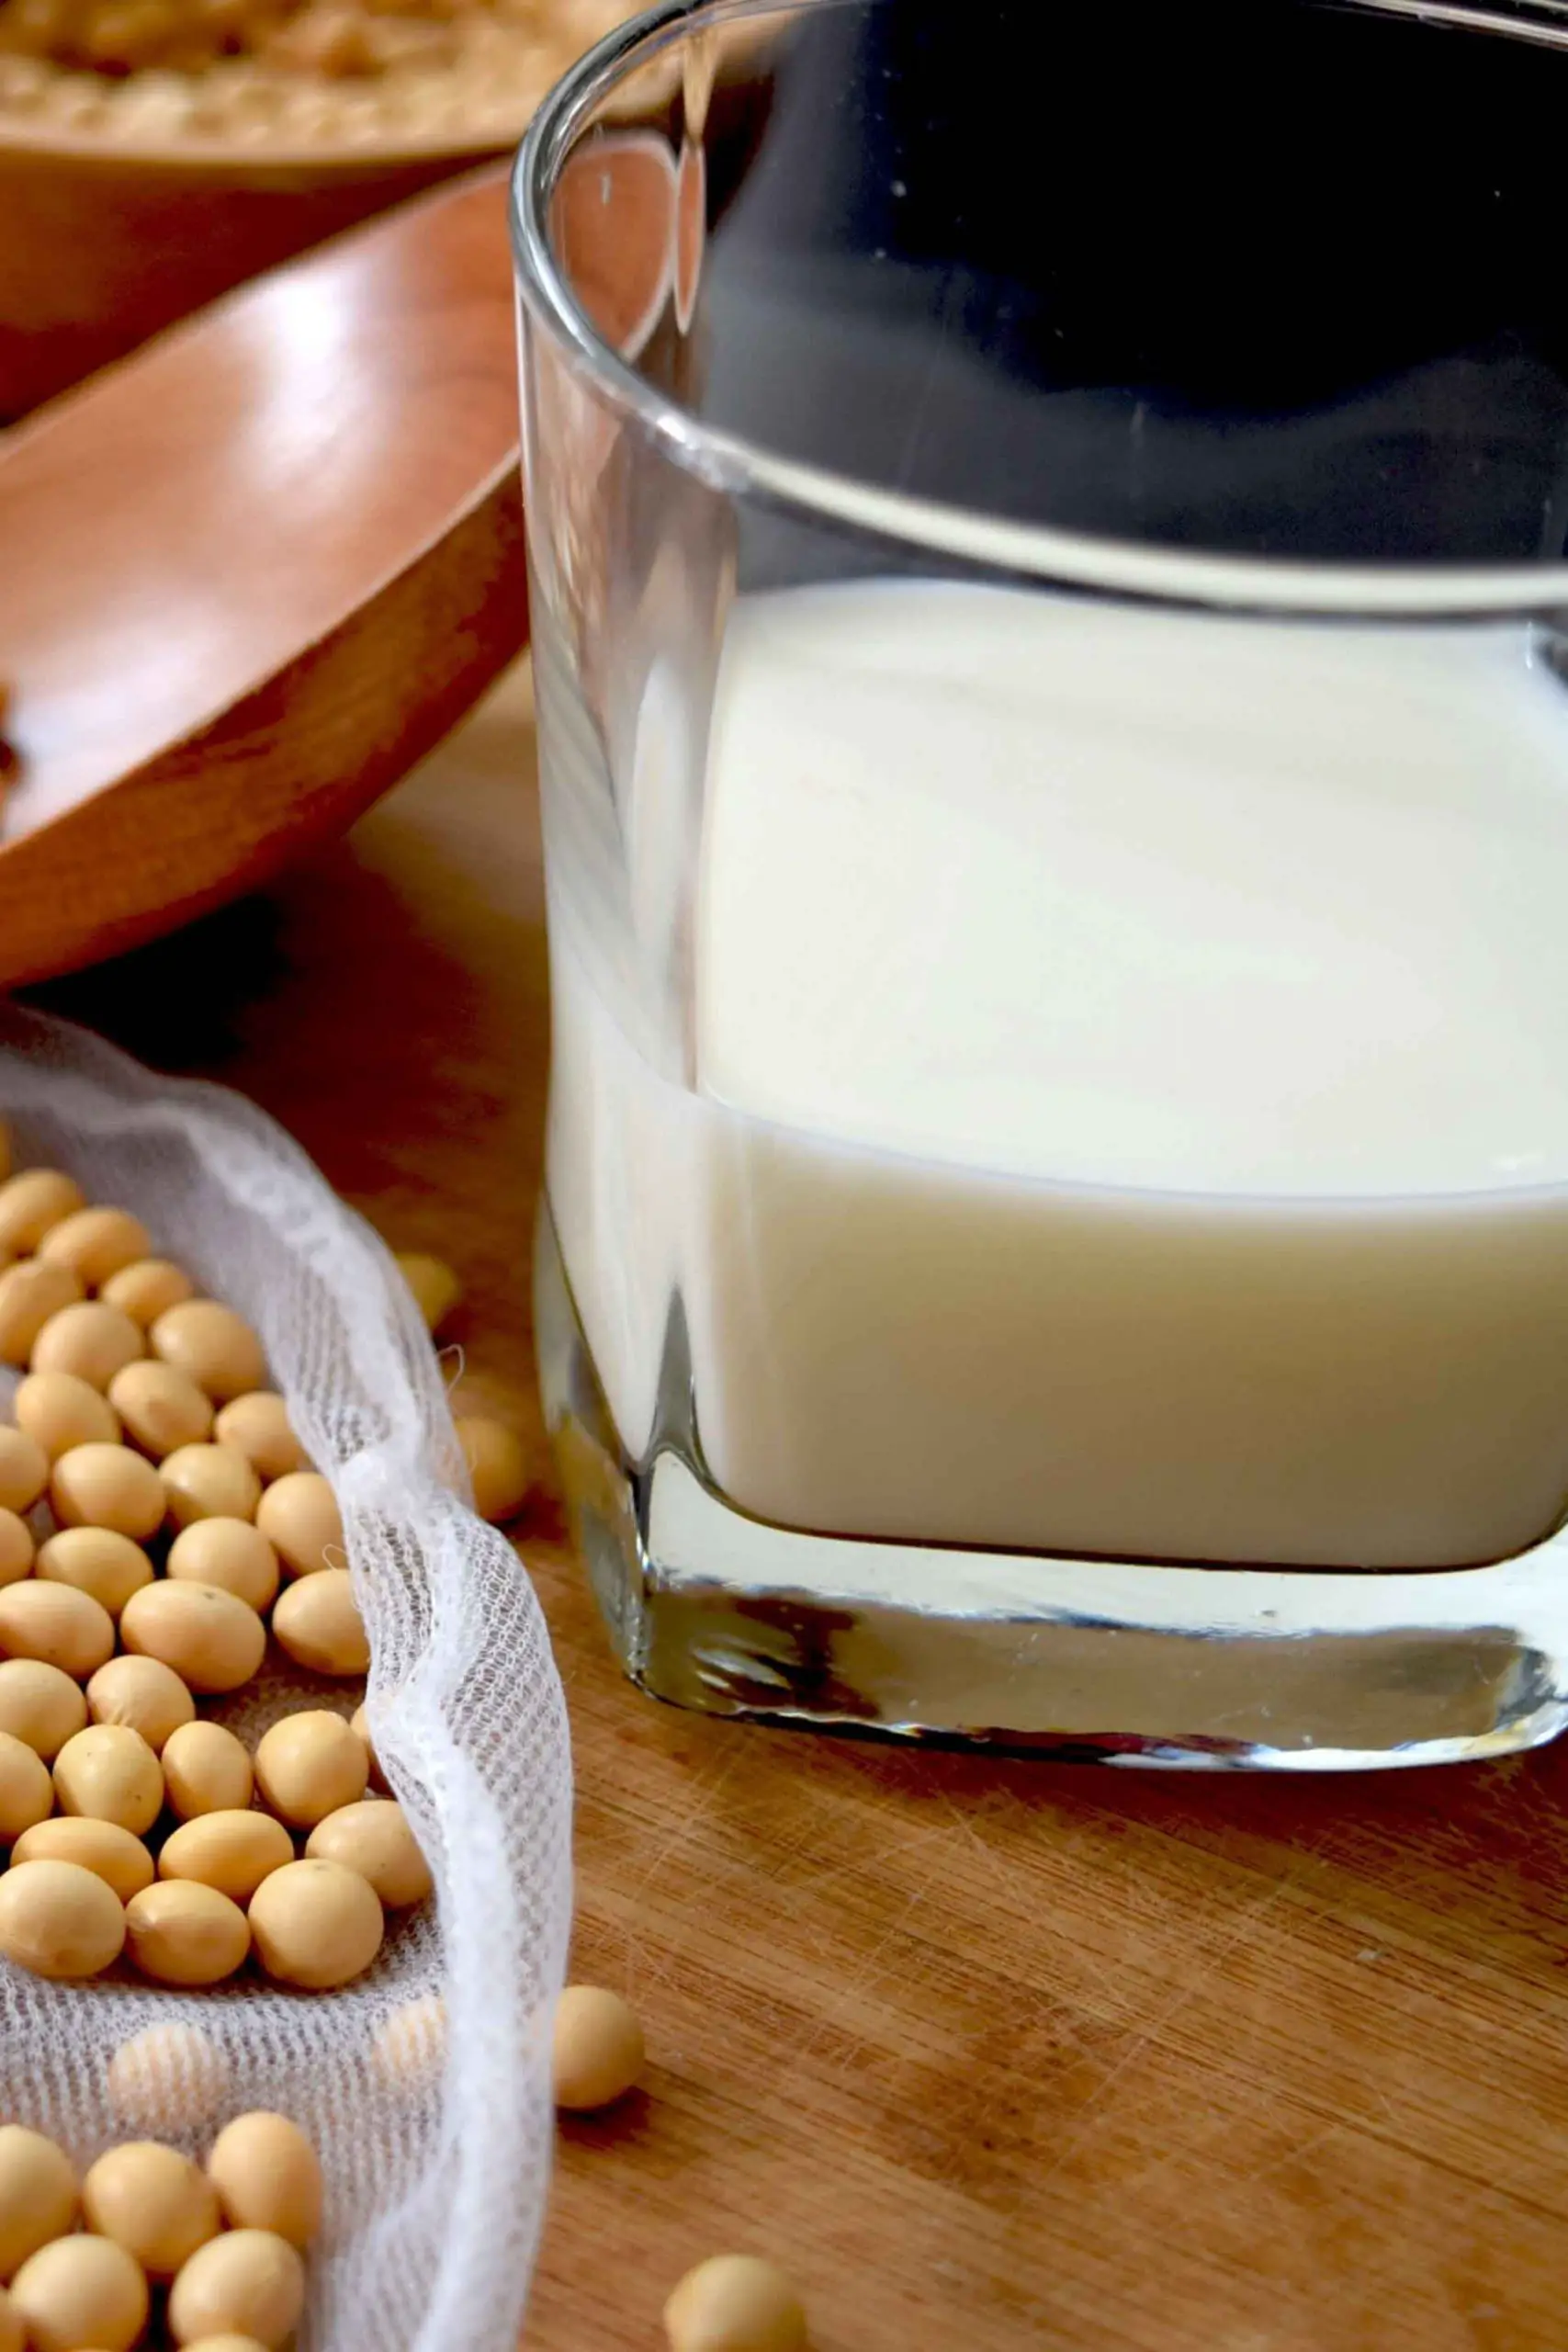 Soy milk and soy beans